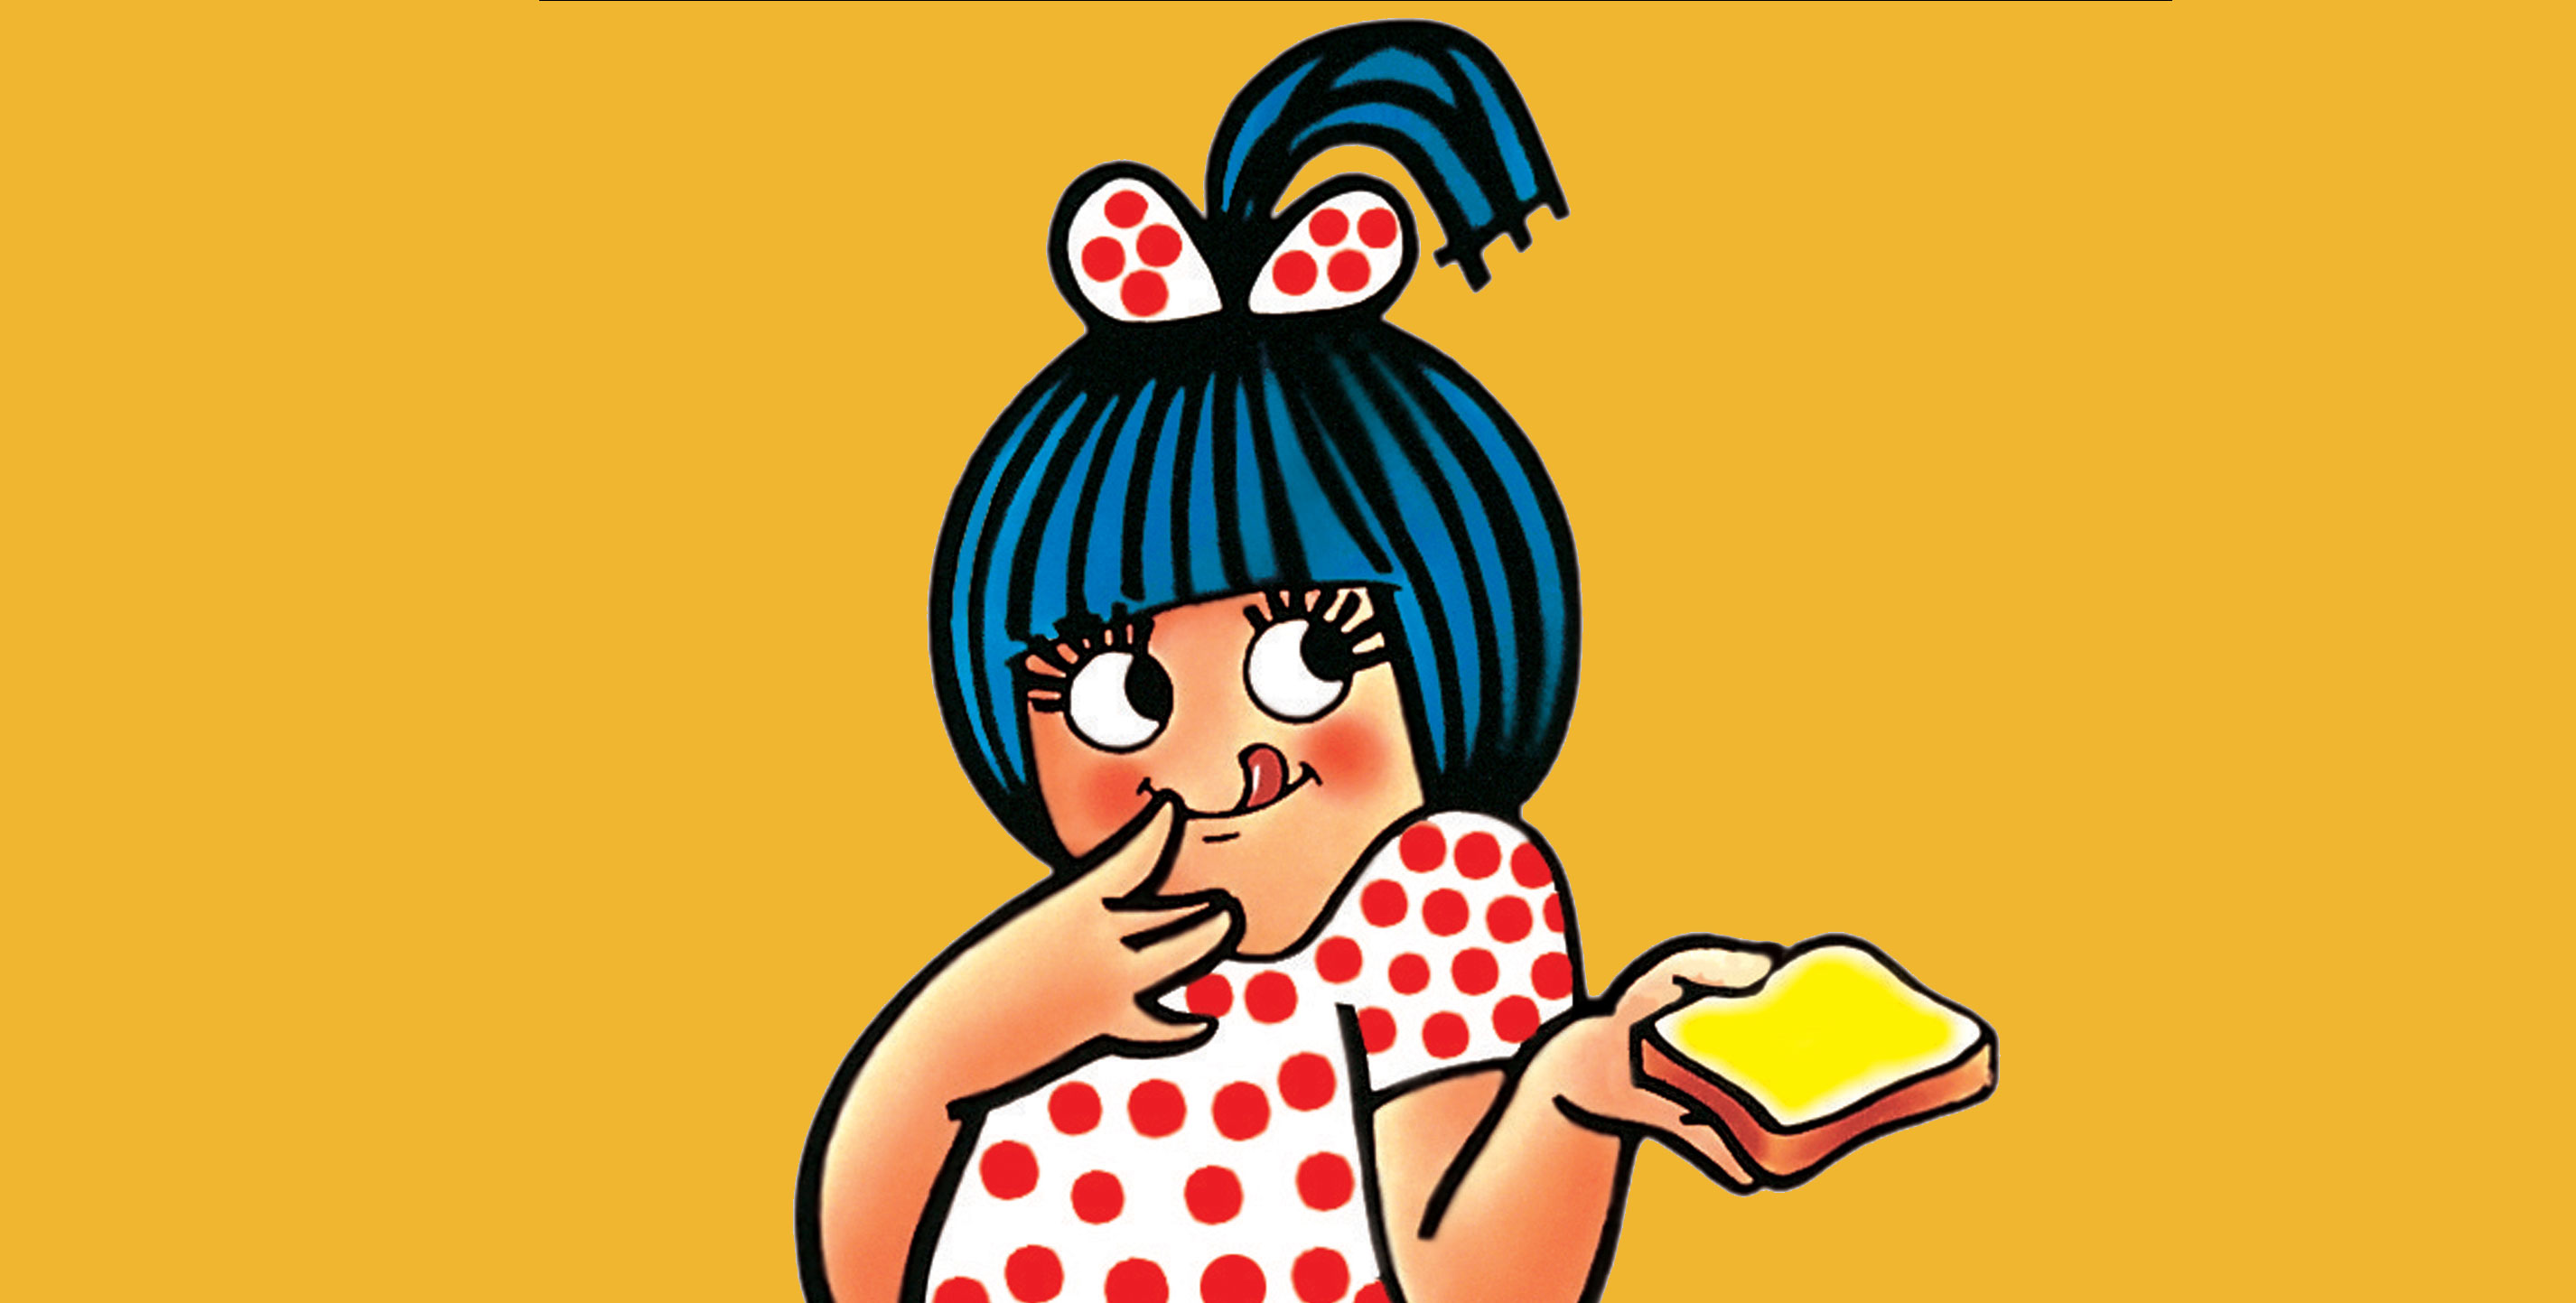 Сливочное масло девочка. Amul girl. Amul logo. Butter girl. Girl with Butter.